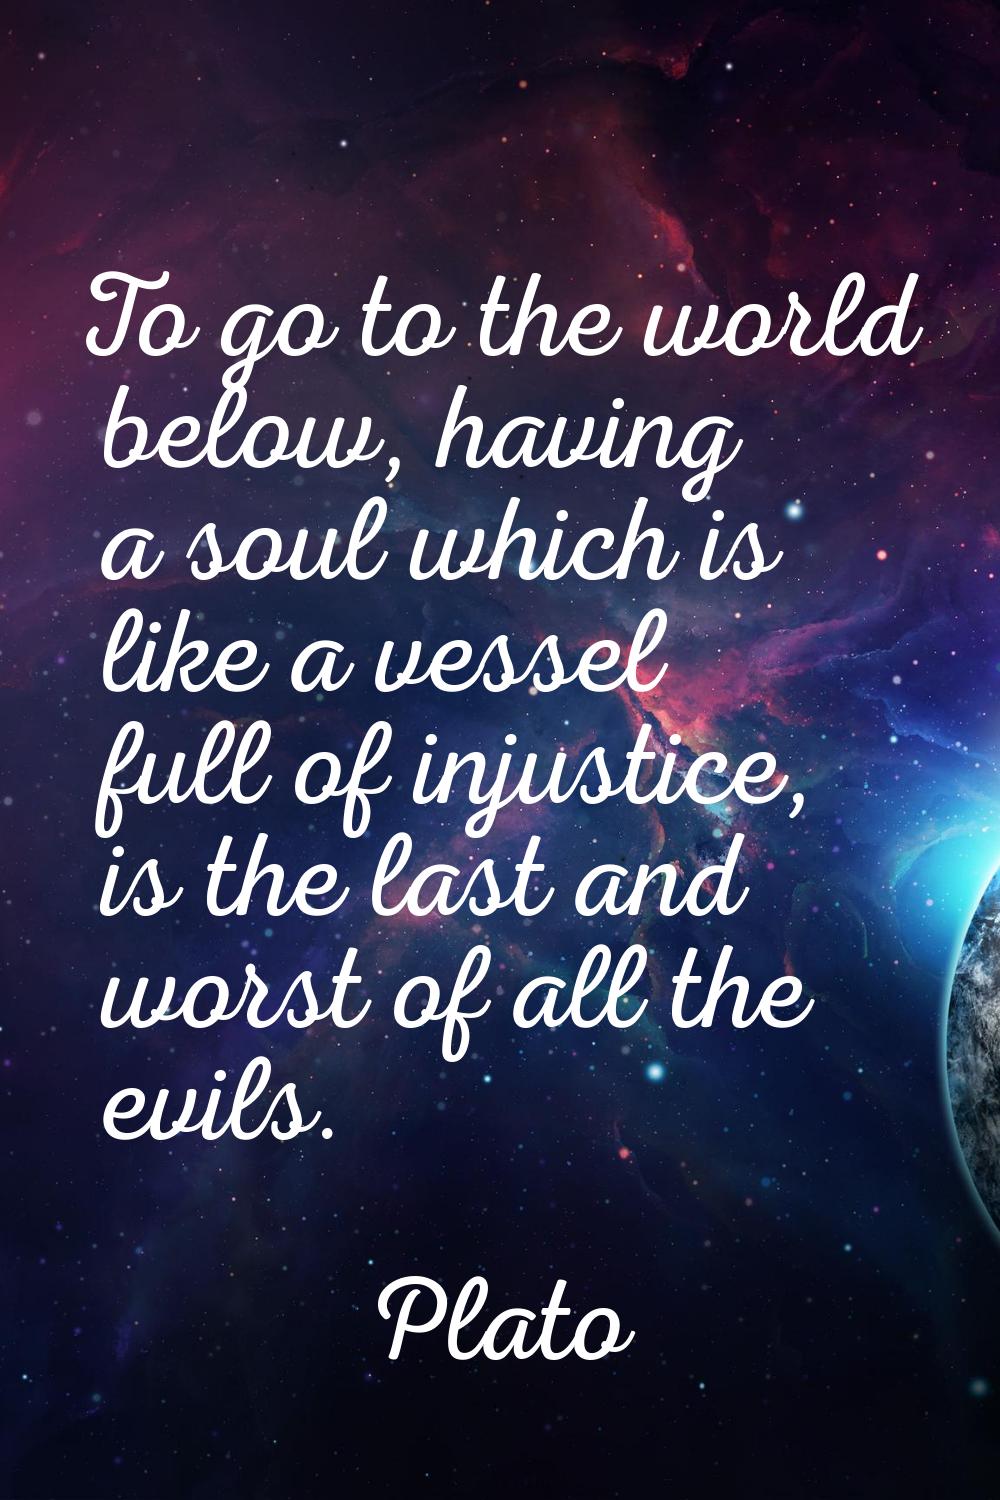 To go to the world below, having a soul which is like a vessel full of injustice, is the last and w